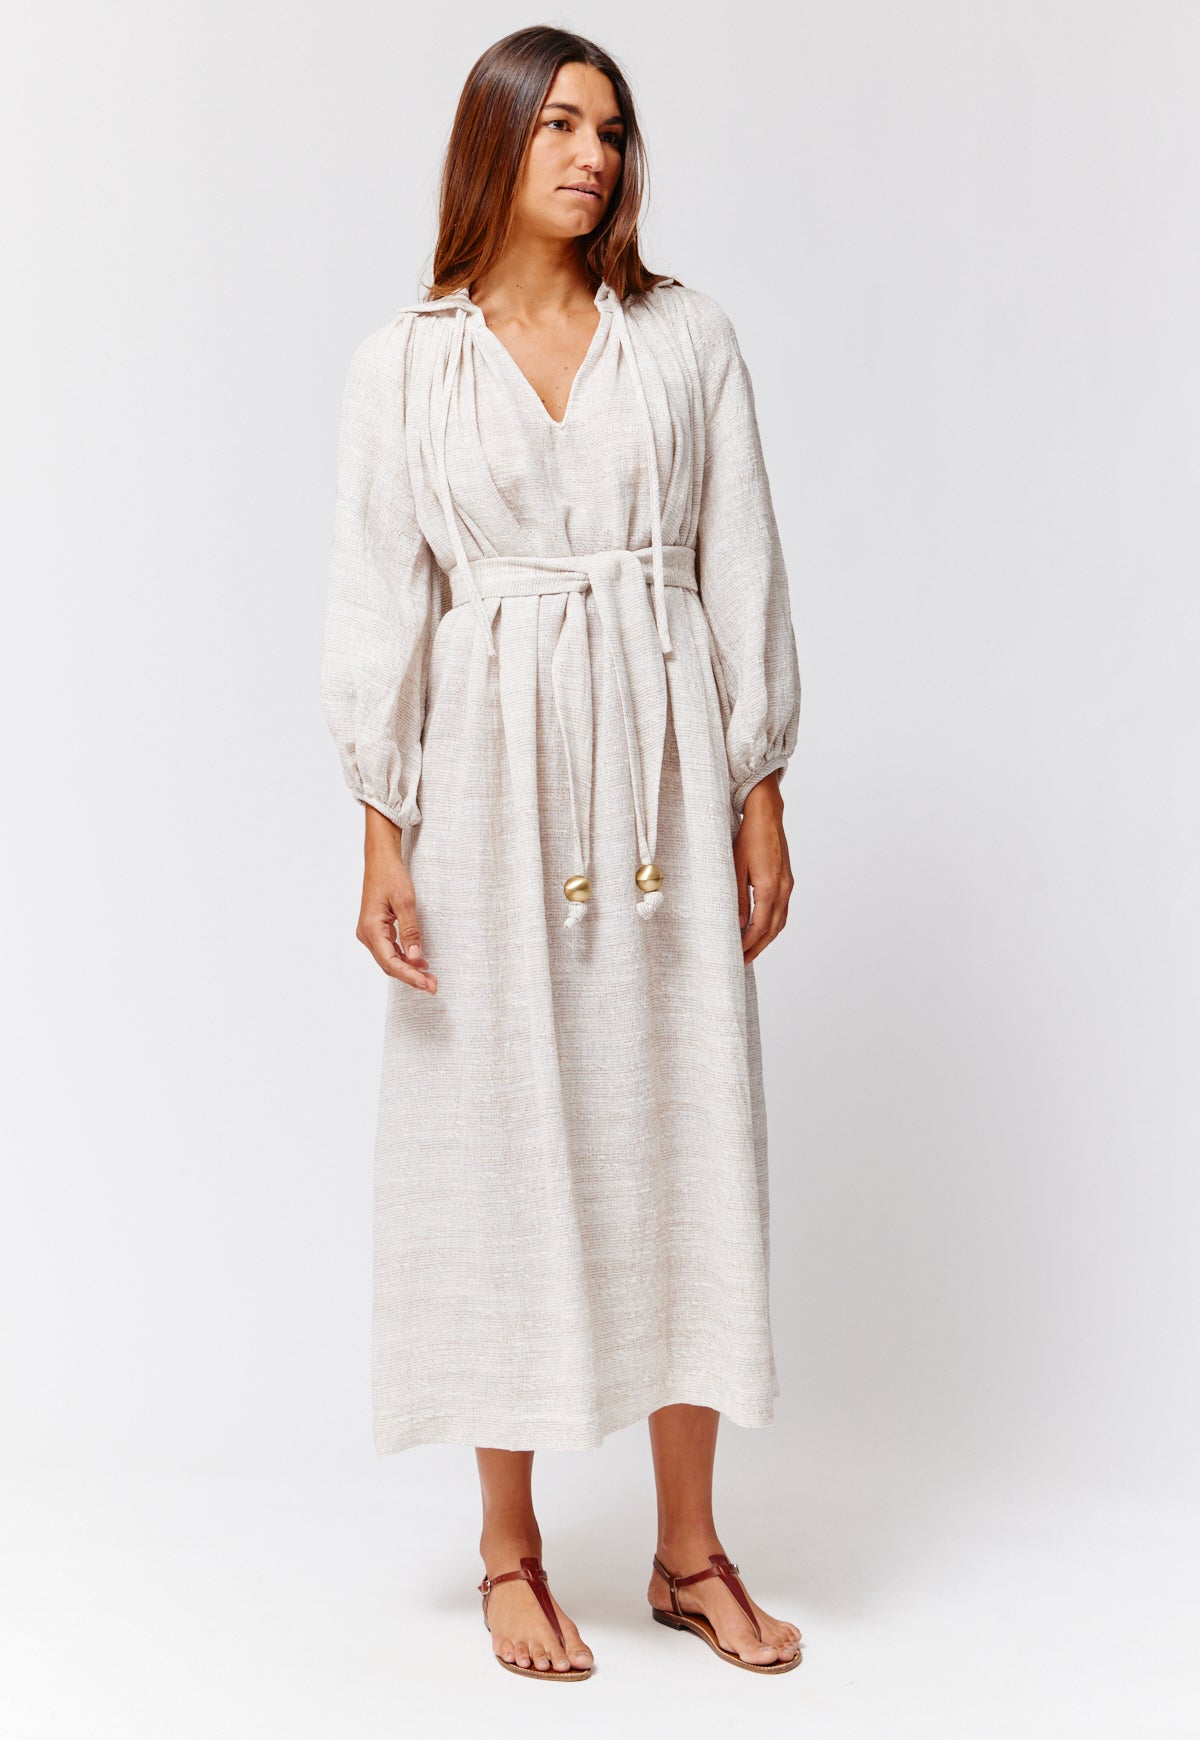 THE POET DRESS in NATURAL STRIPED GAUZE